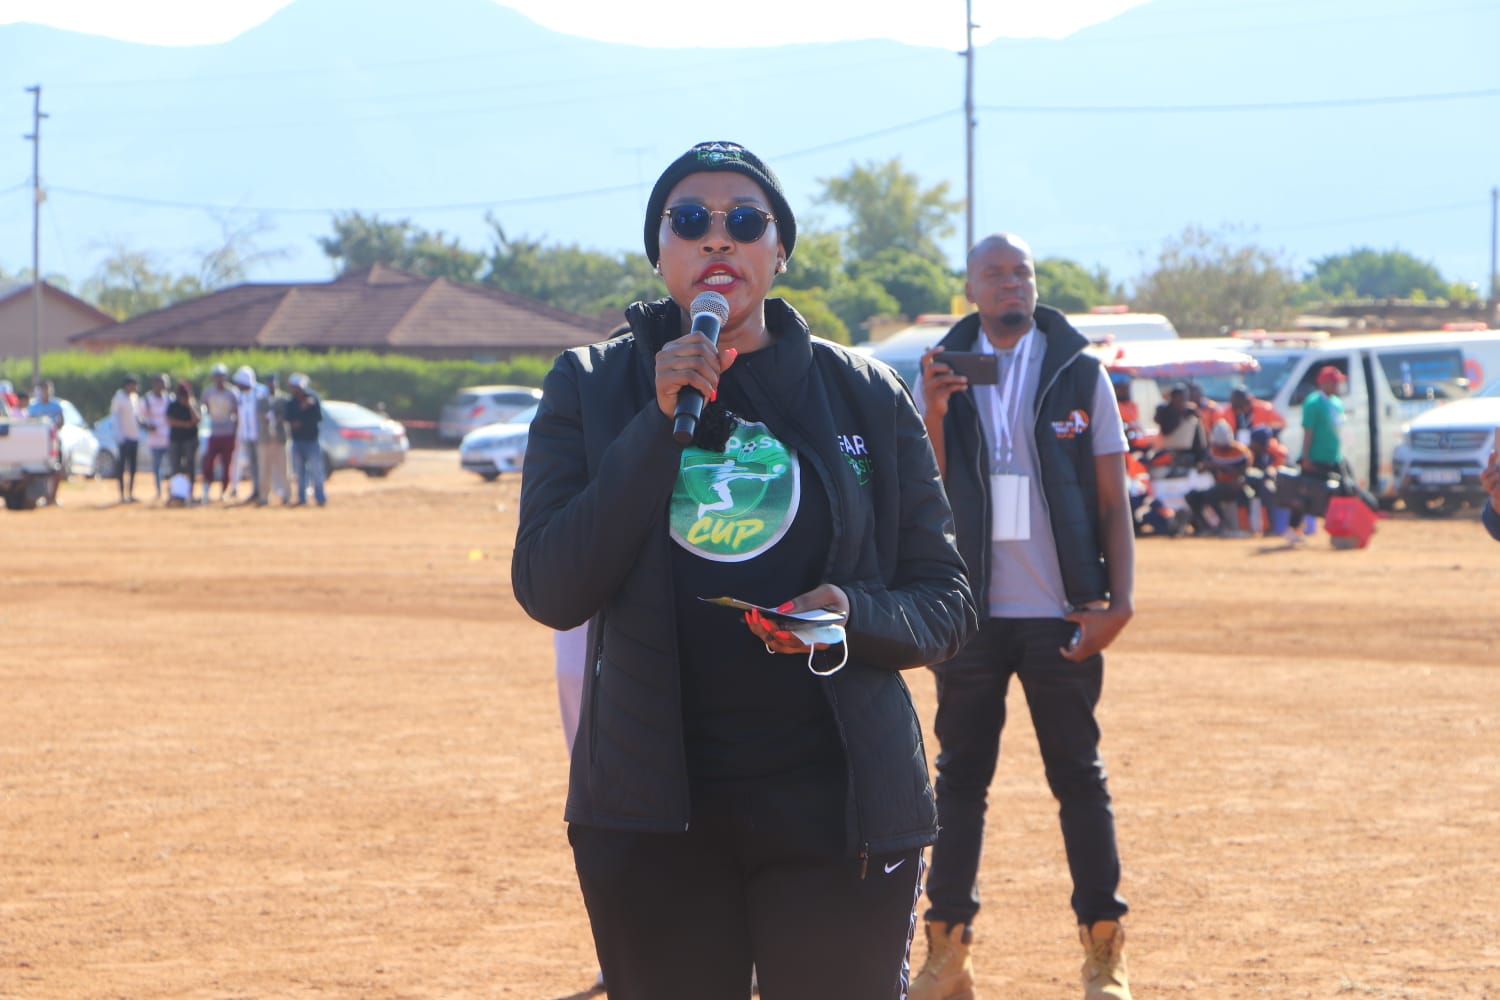 'An Inaugural Football Tournament for boys under 10 was held at Indermark Village in the Blouberg Municipality with the aim of unearthing raw talent.